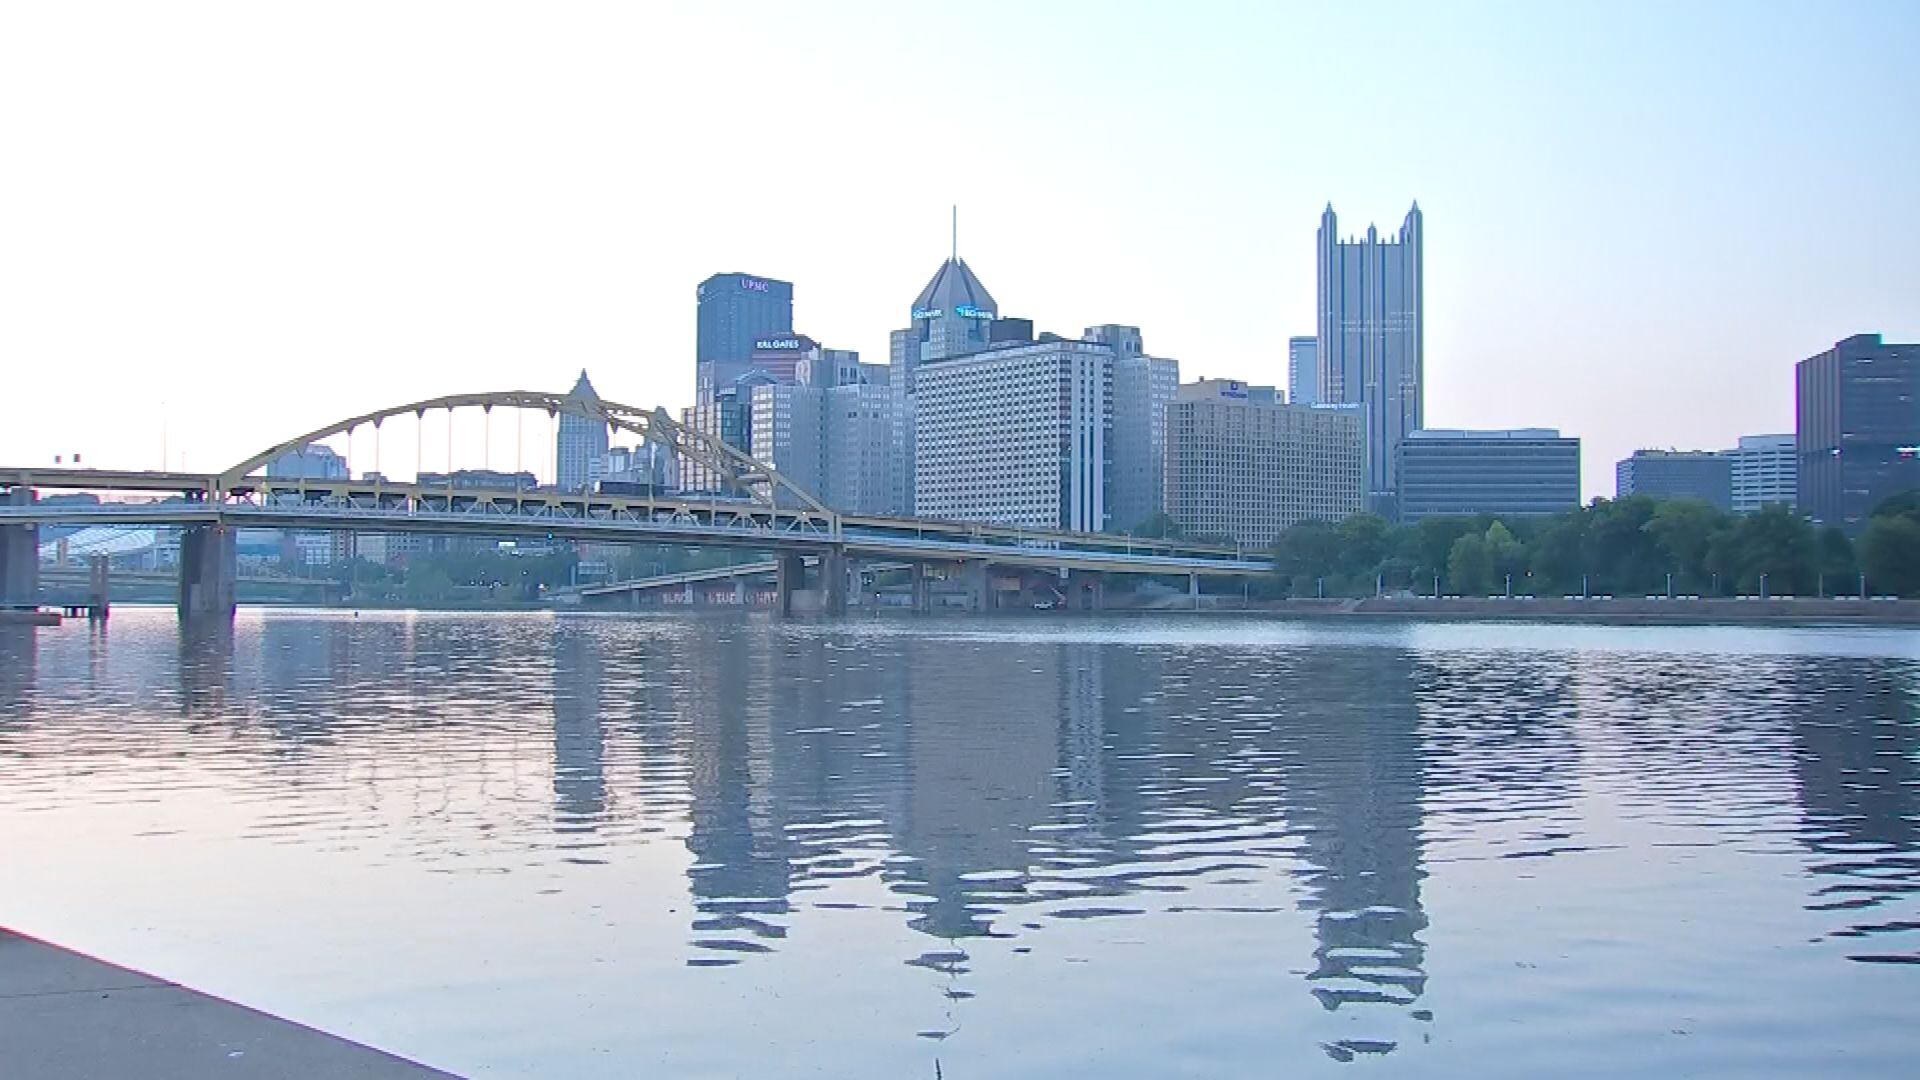 The North Shore was an aha moment for Pittsburgh's riverfronts